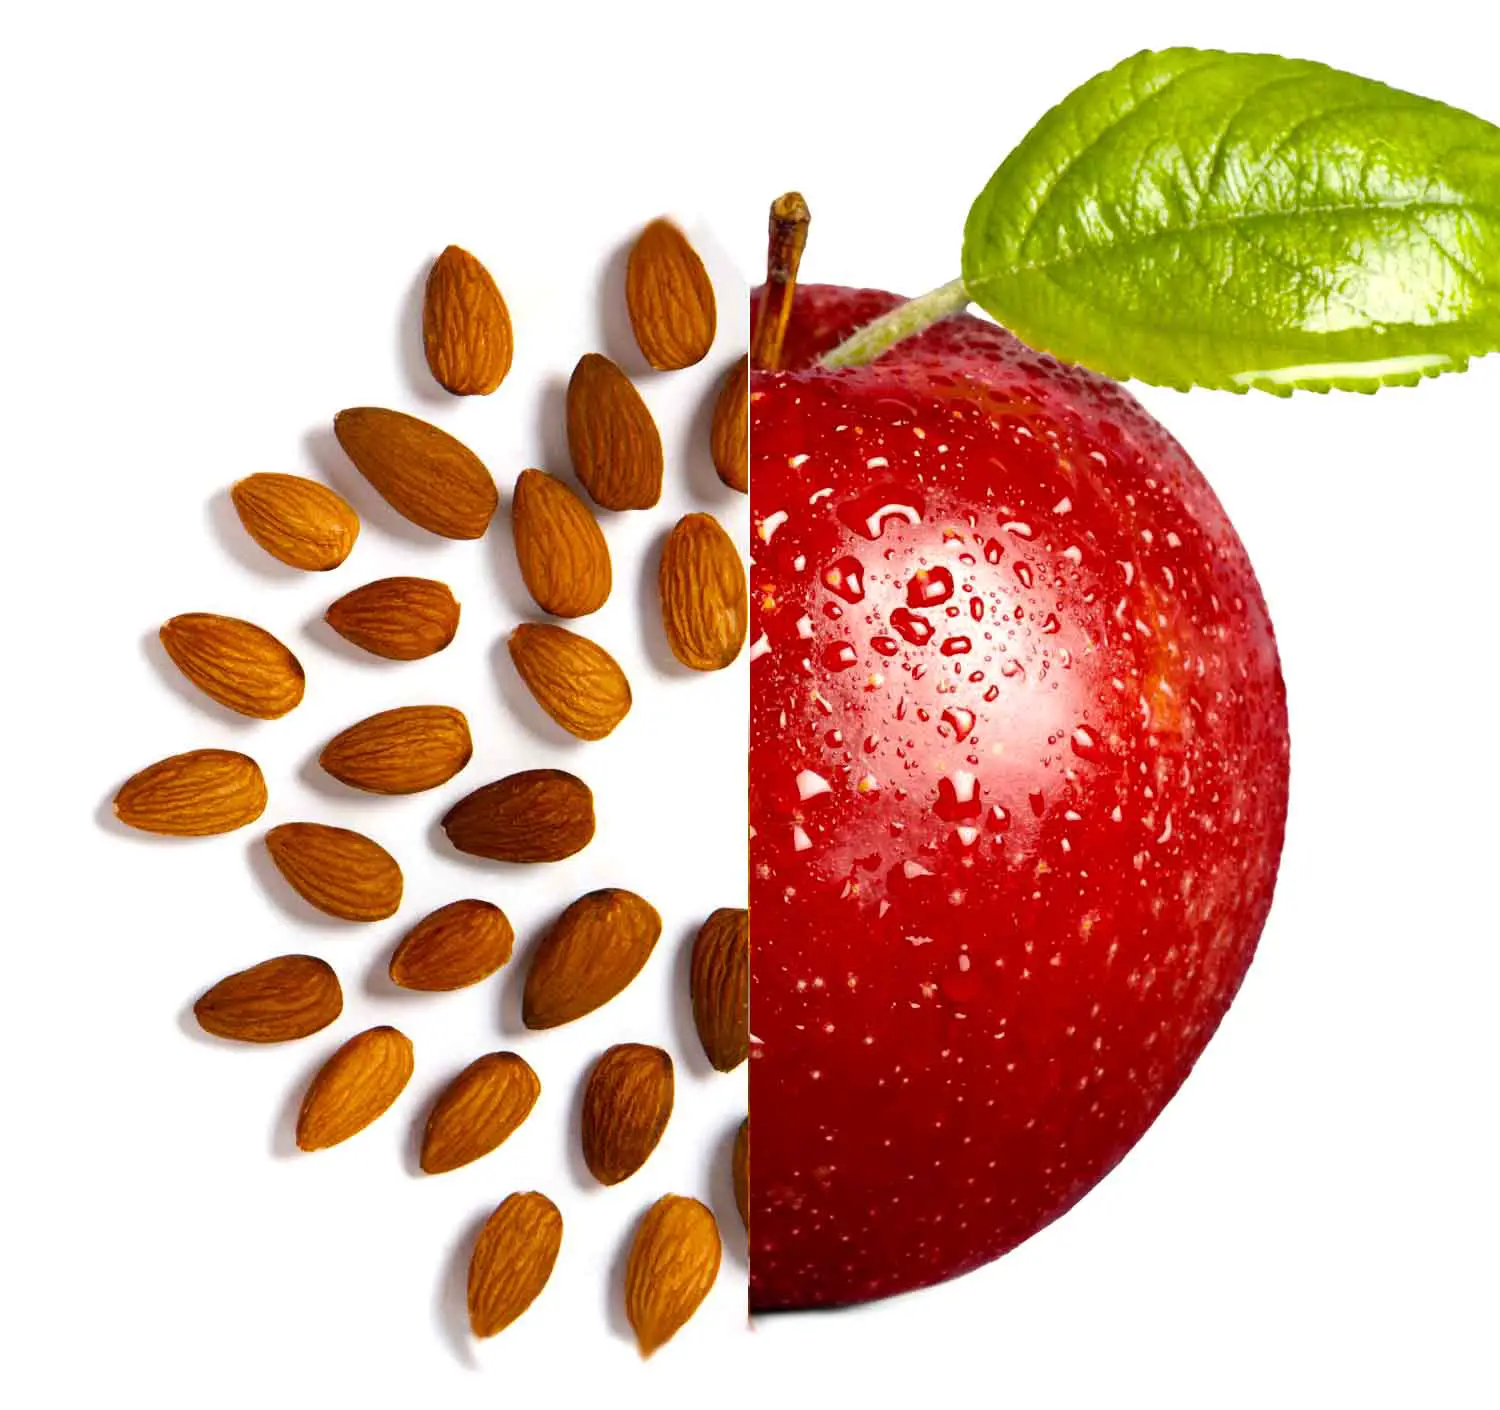 Apples go together with almonds